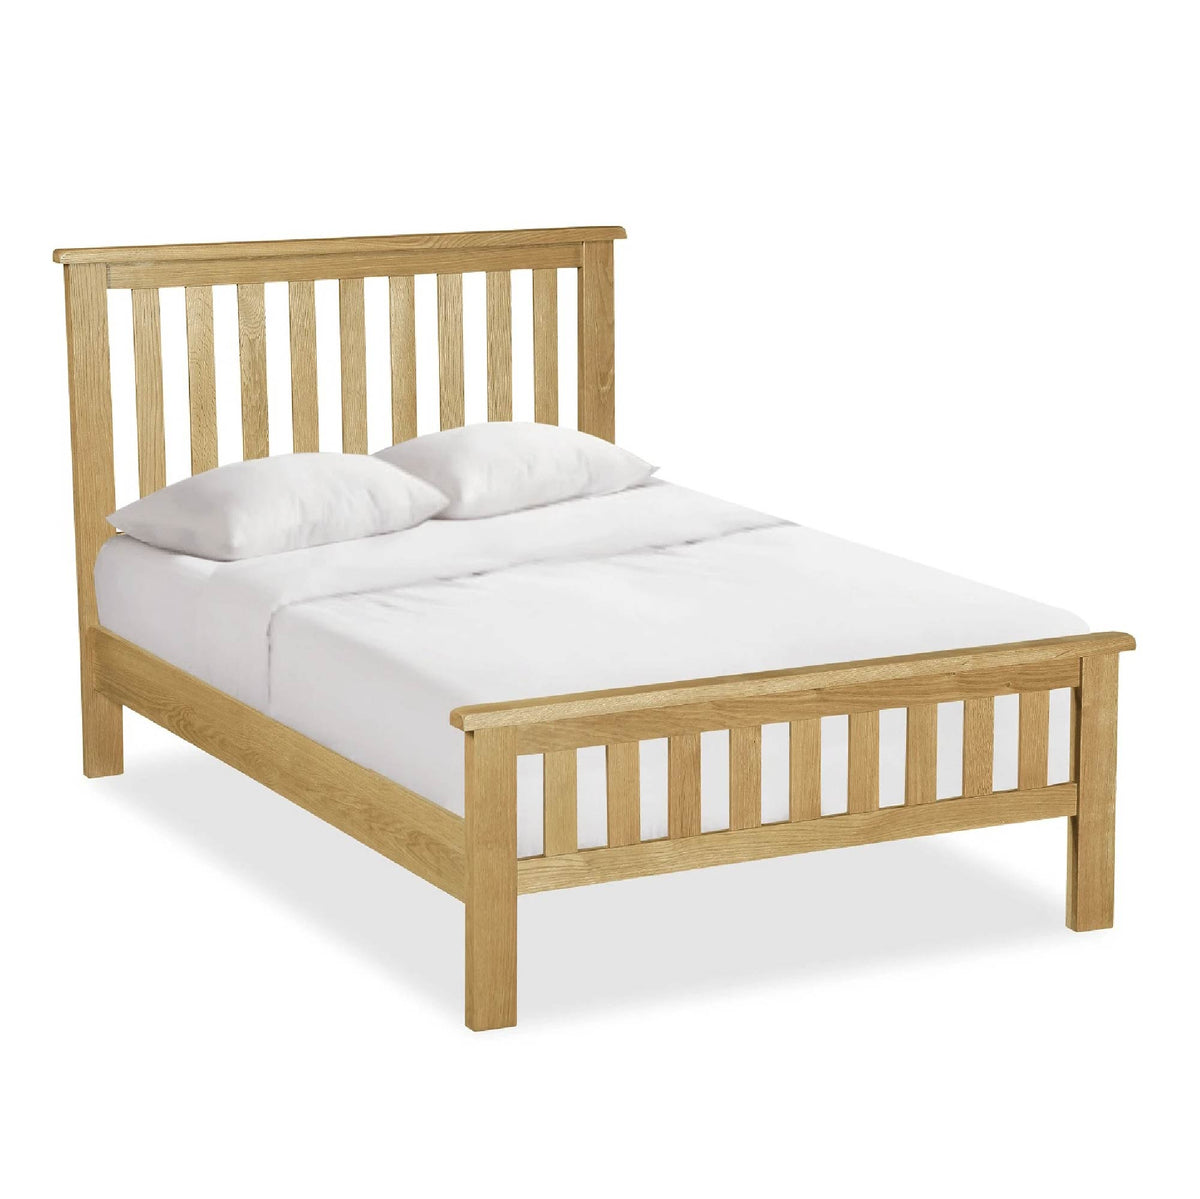 Lanner Oak 4ft Small Double Bed Frame from Roseland Furniture